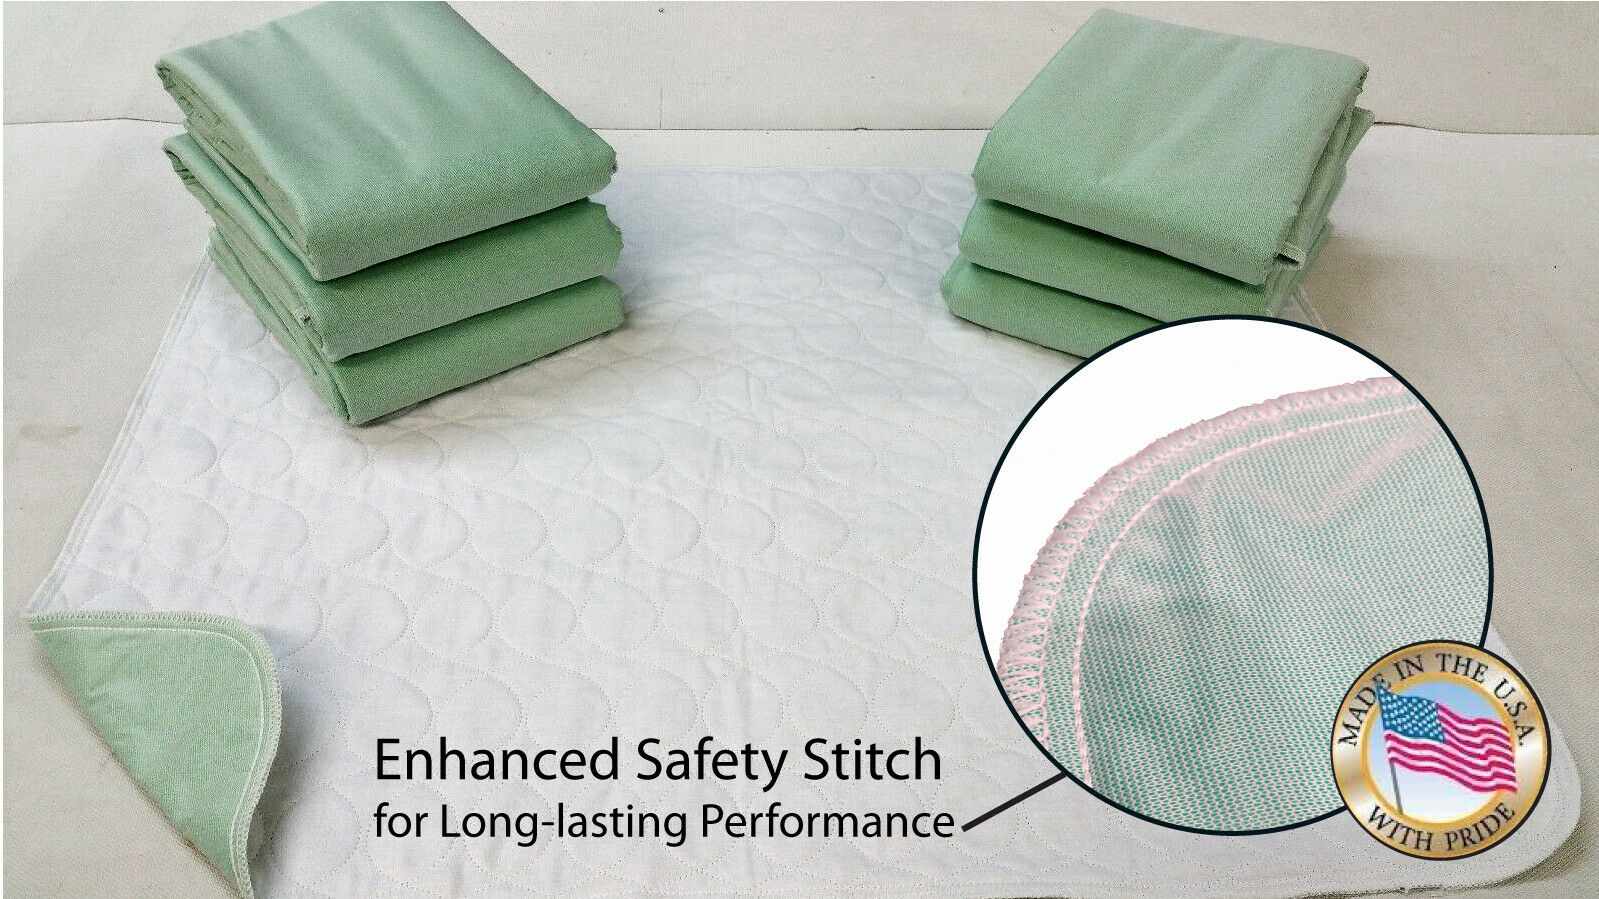 6 New Bed Pads>34x36<washable Incontinence Reusable Underpad Hospital Grade/usa